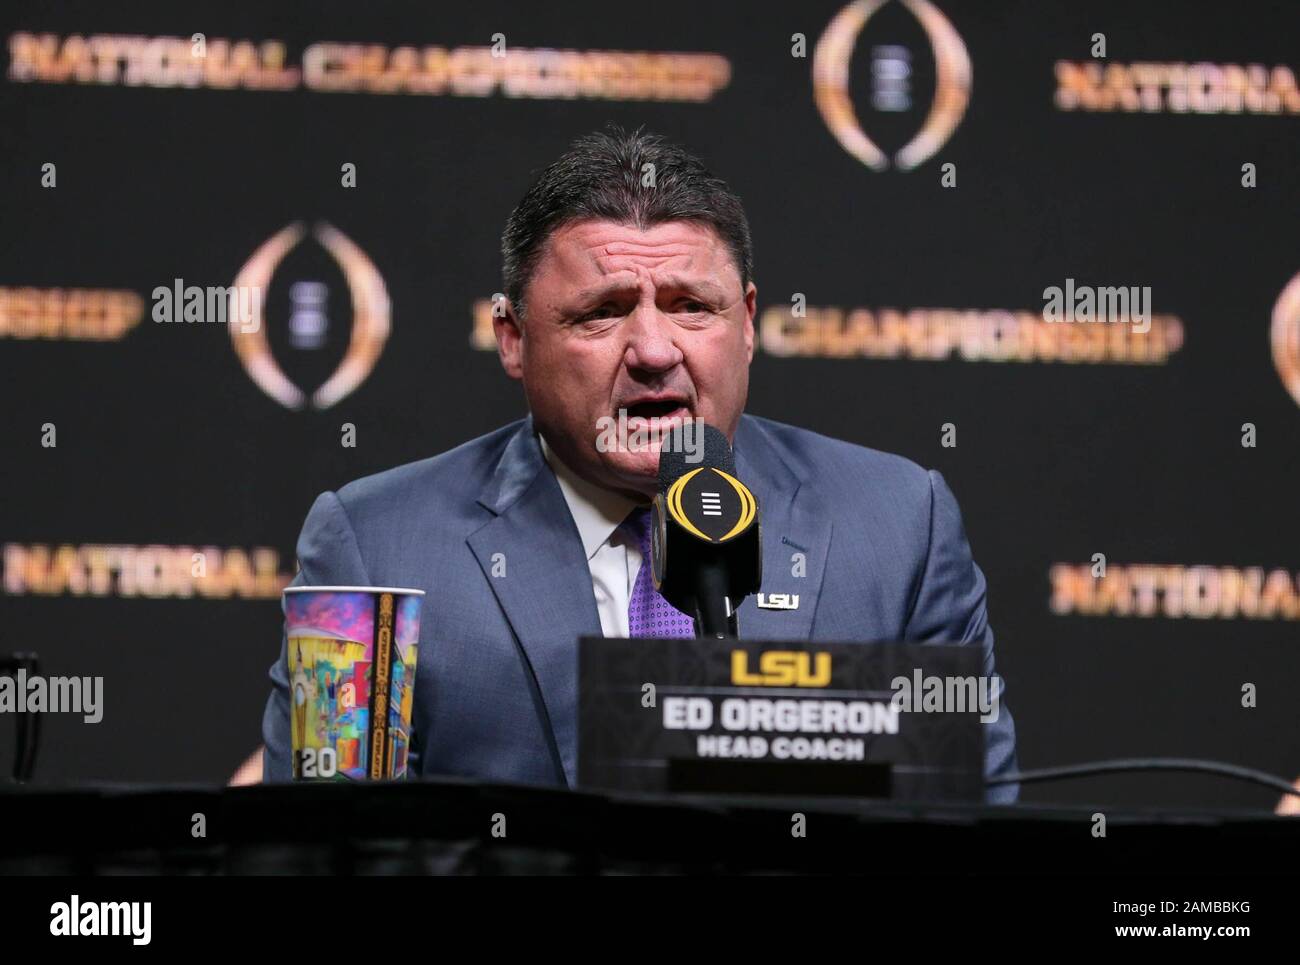 New Orleans, LA, USA. 12th Jan, 2020. LSU Head Coach Ed Orgeron talks with the media during the Head Coaches Press Conference before the College Football National Championship between the Clemson Tigers and the LSU Tigers at the Sheraton Hotel in New Orleans, LA. Jonathan Mailhes/CSM/Alamy Live News Stock Photo